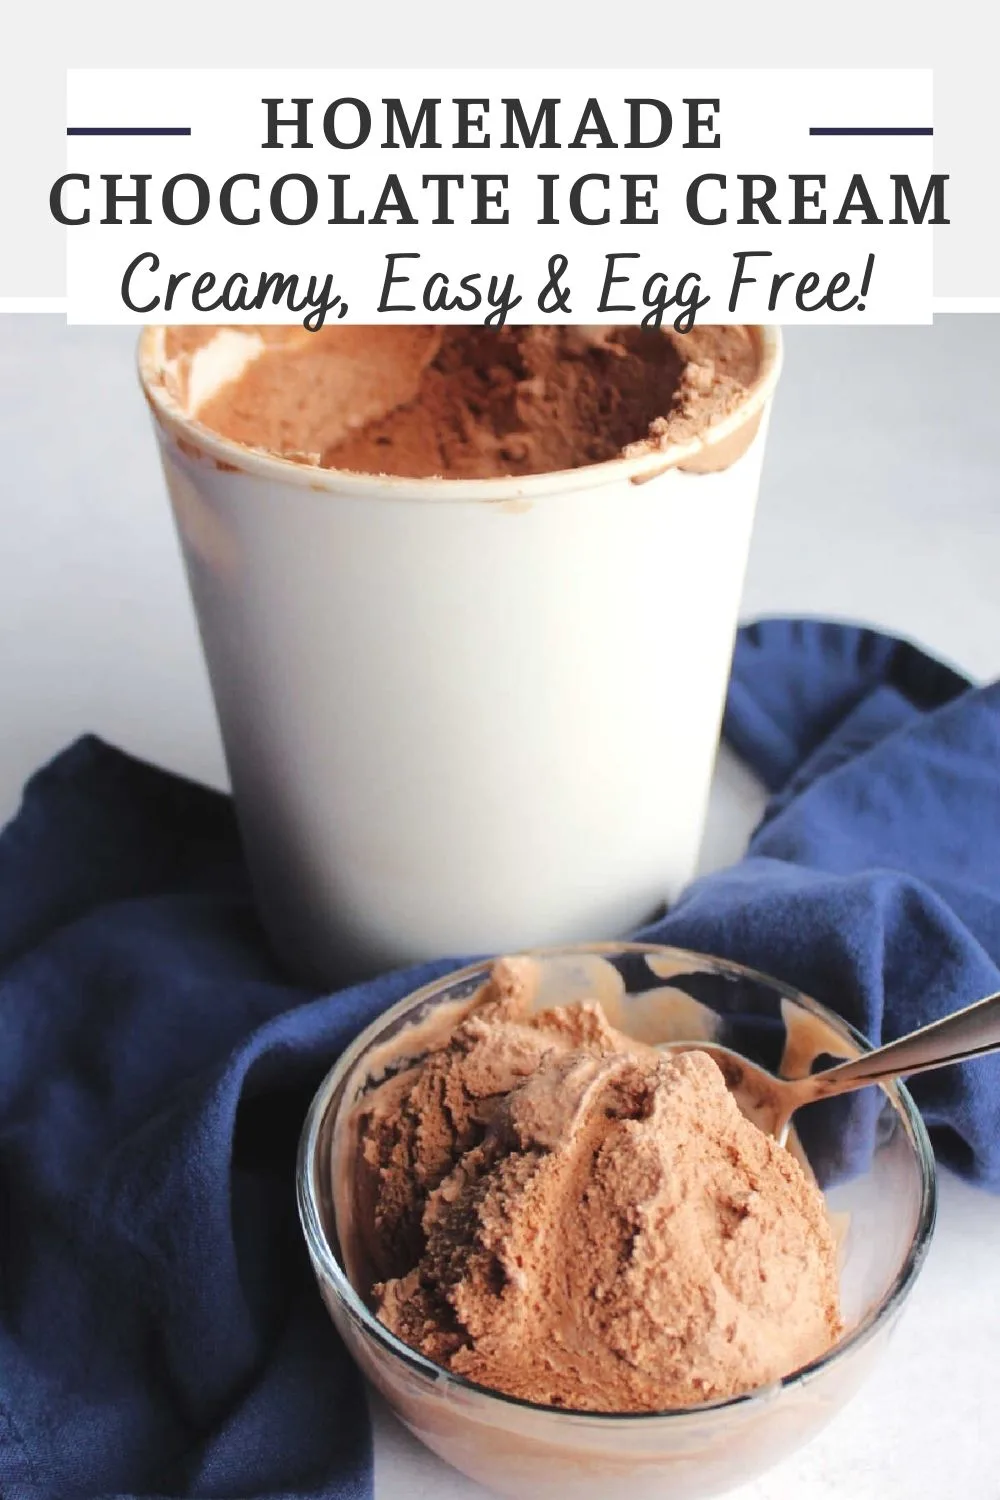 This creamy delicious homemade chocolate ice cream could not be easier to make. This egg free recipe makes getting the base in the churner fast and the results are smooth and tasty.